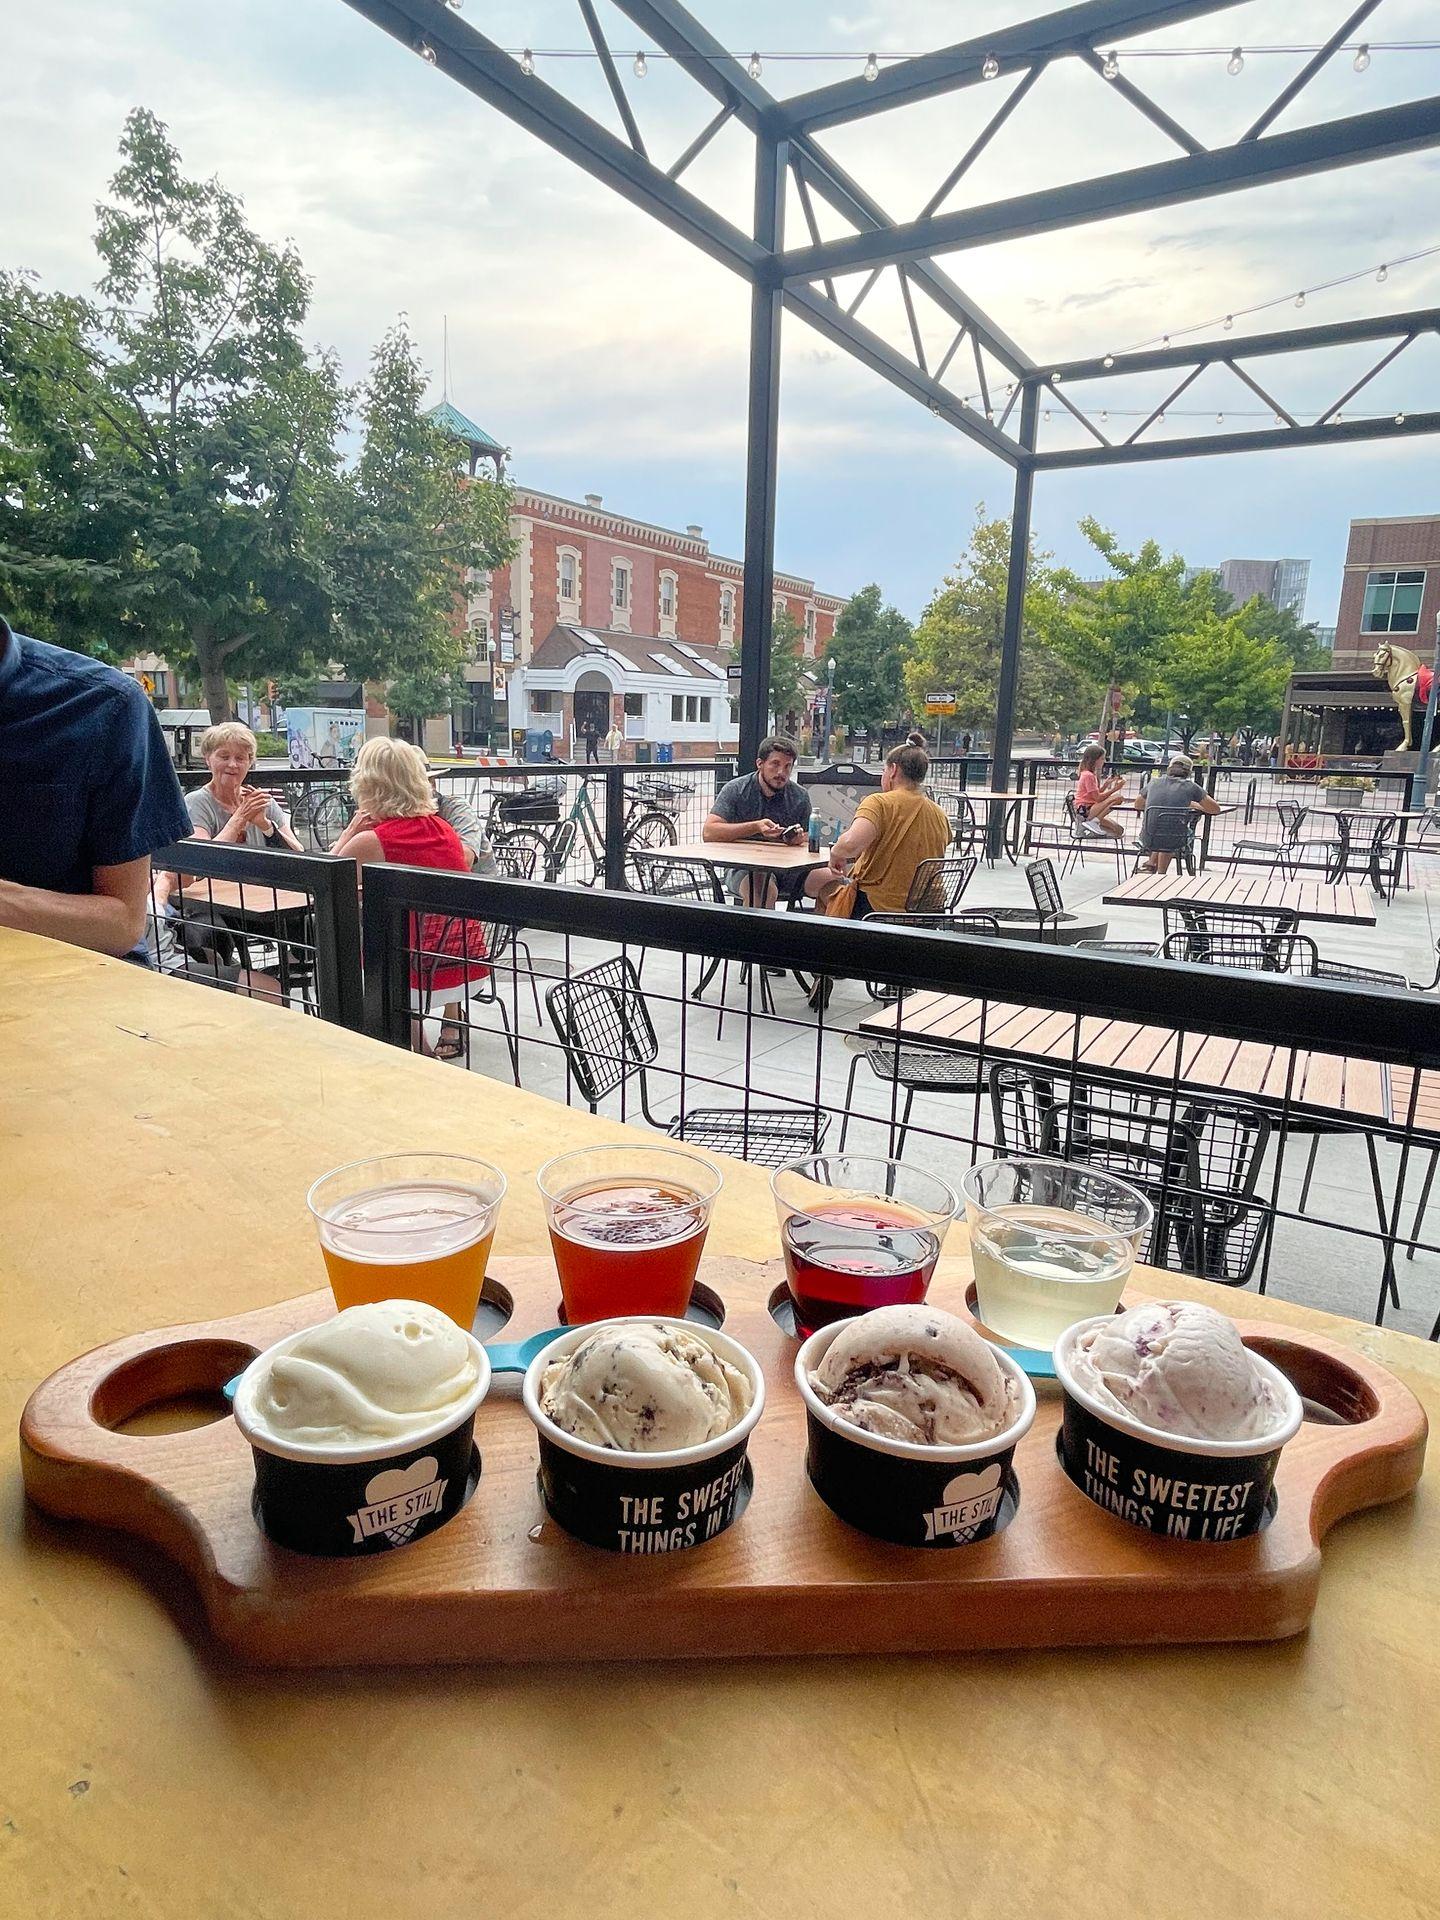 A side view of a flight with 4 ice cream flavors, two beers and two wines from The Stil.